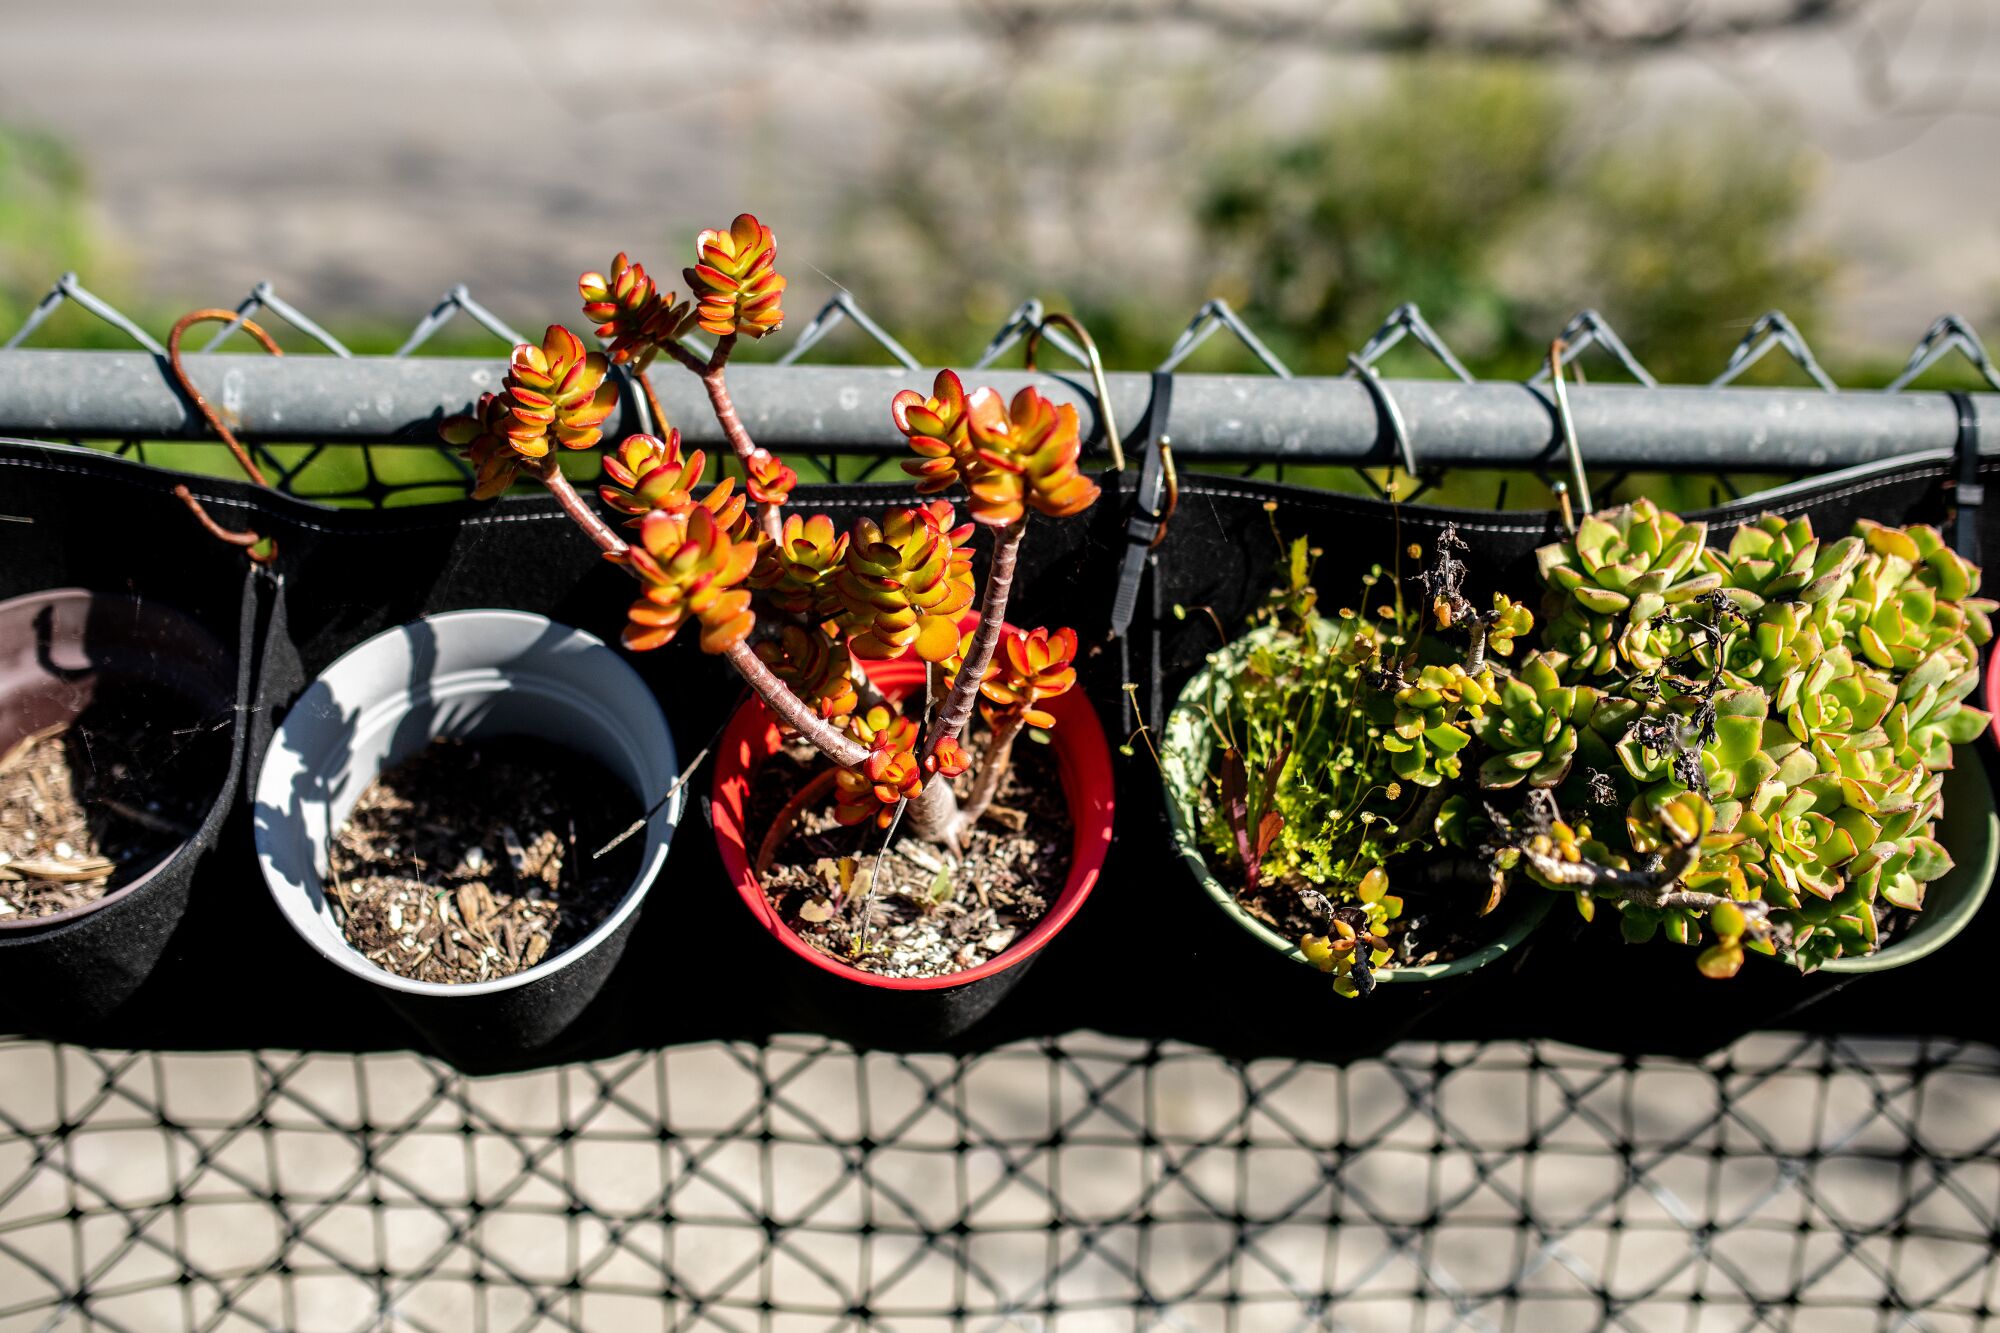 Succulents in pots hang from a chain-link fence.